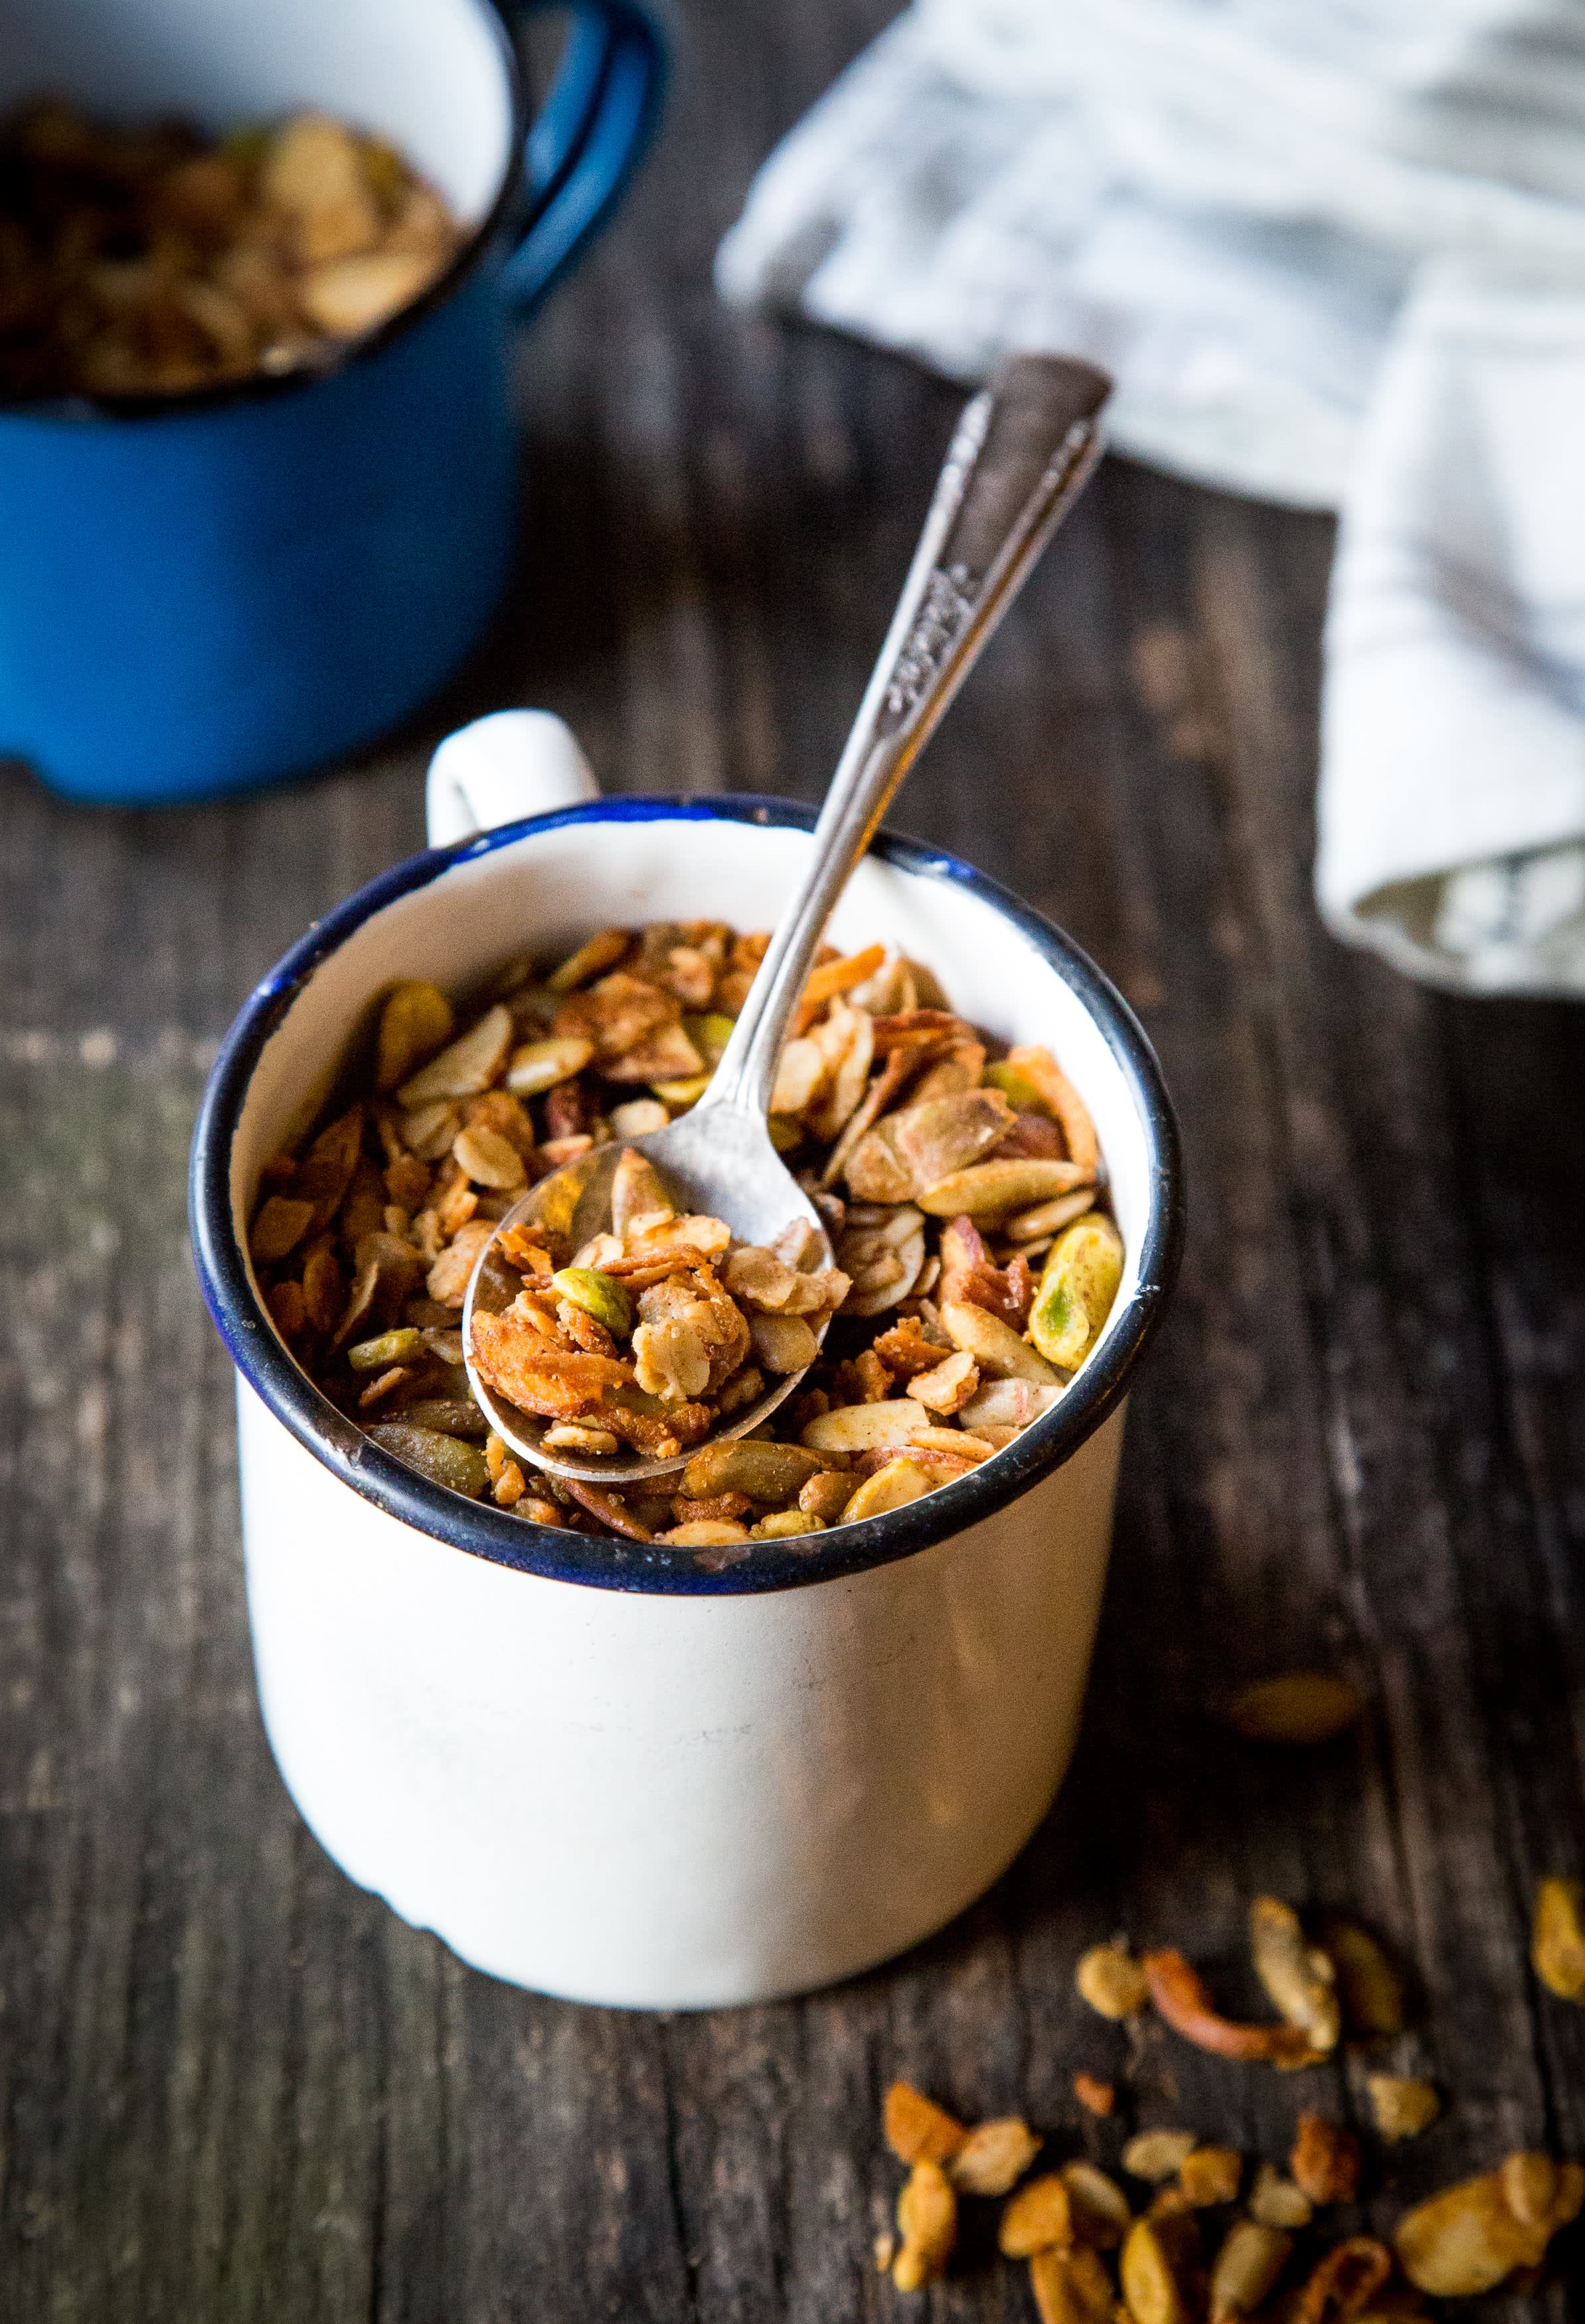 Muesli vs. Granola: What's the Difference?